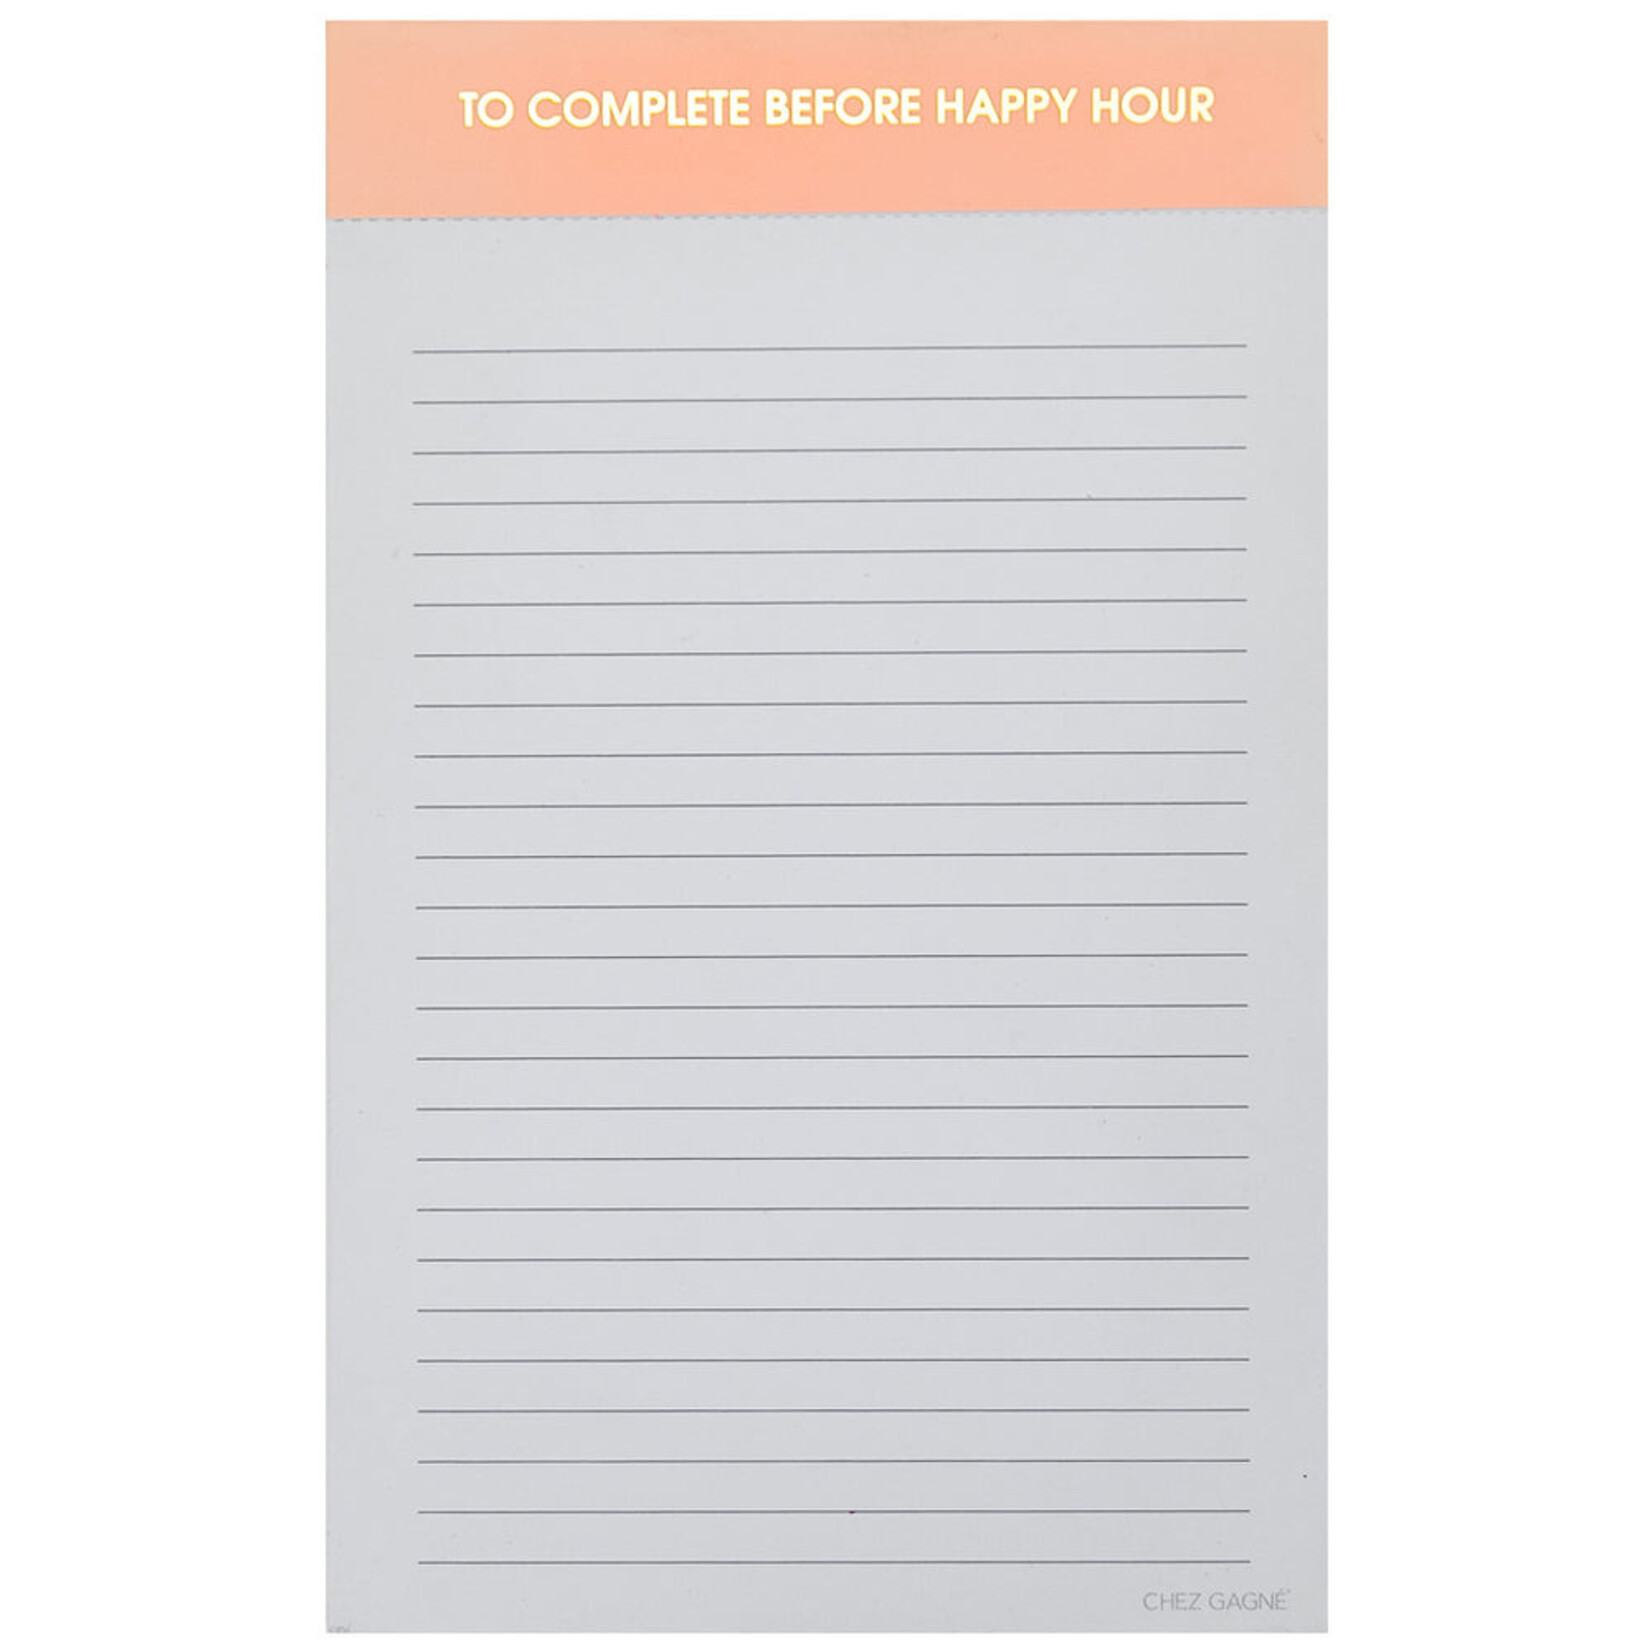 Chez Gagne To Complete Before Happy Hour Notepad